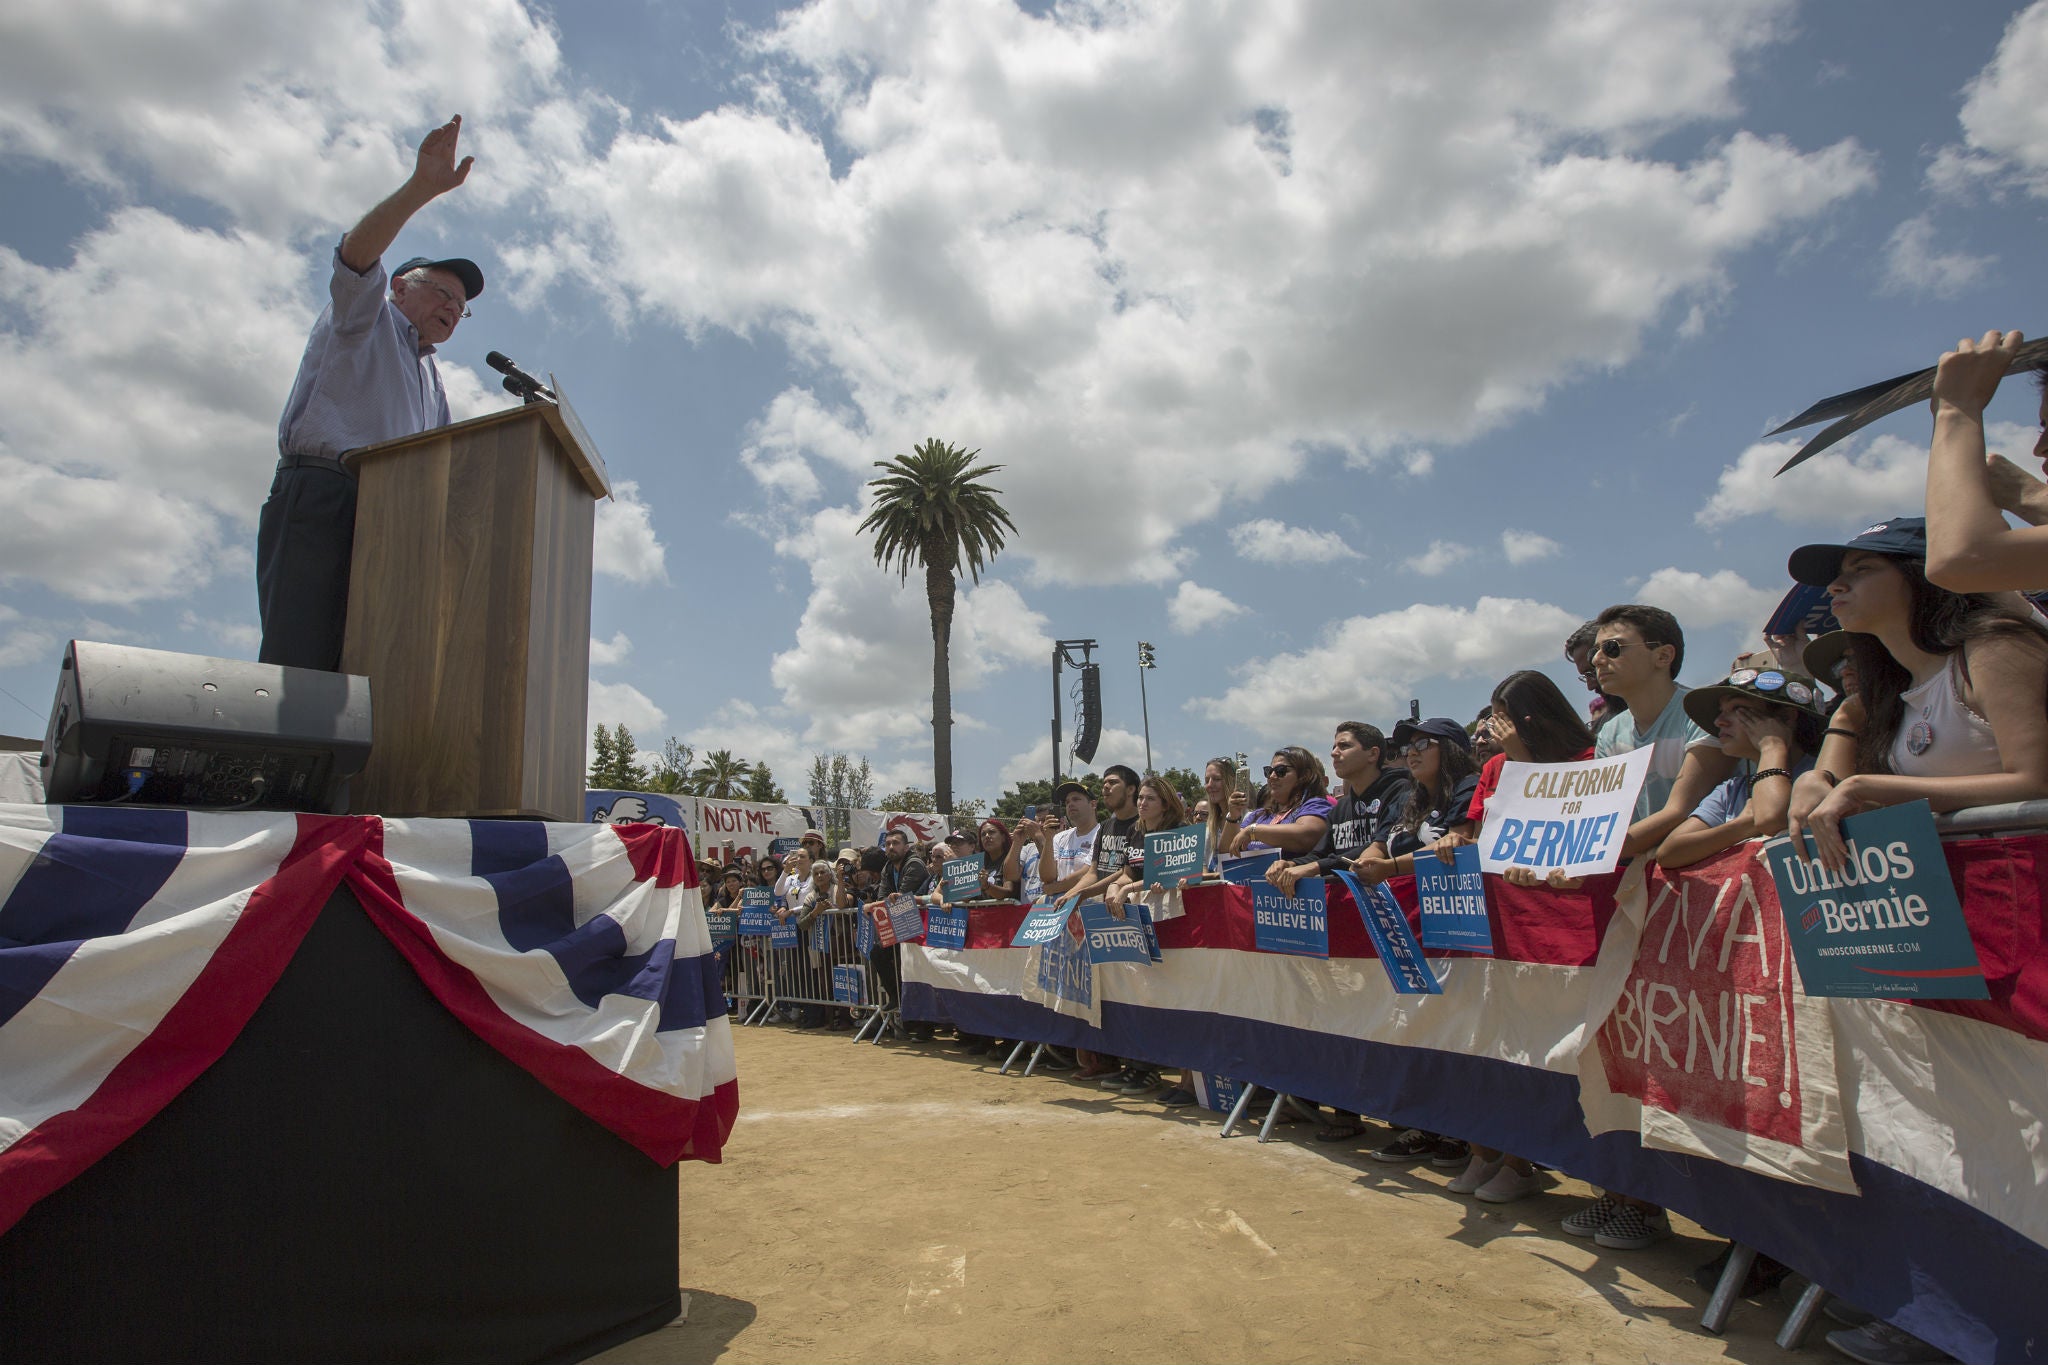 Bernie Sanders campaigns in East Los Angeles, during a campaign slog that he hopes will help him to edge out Hillary Clinton in California